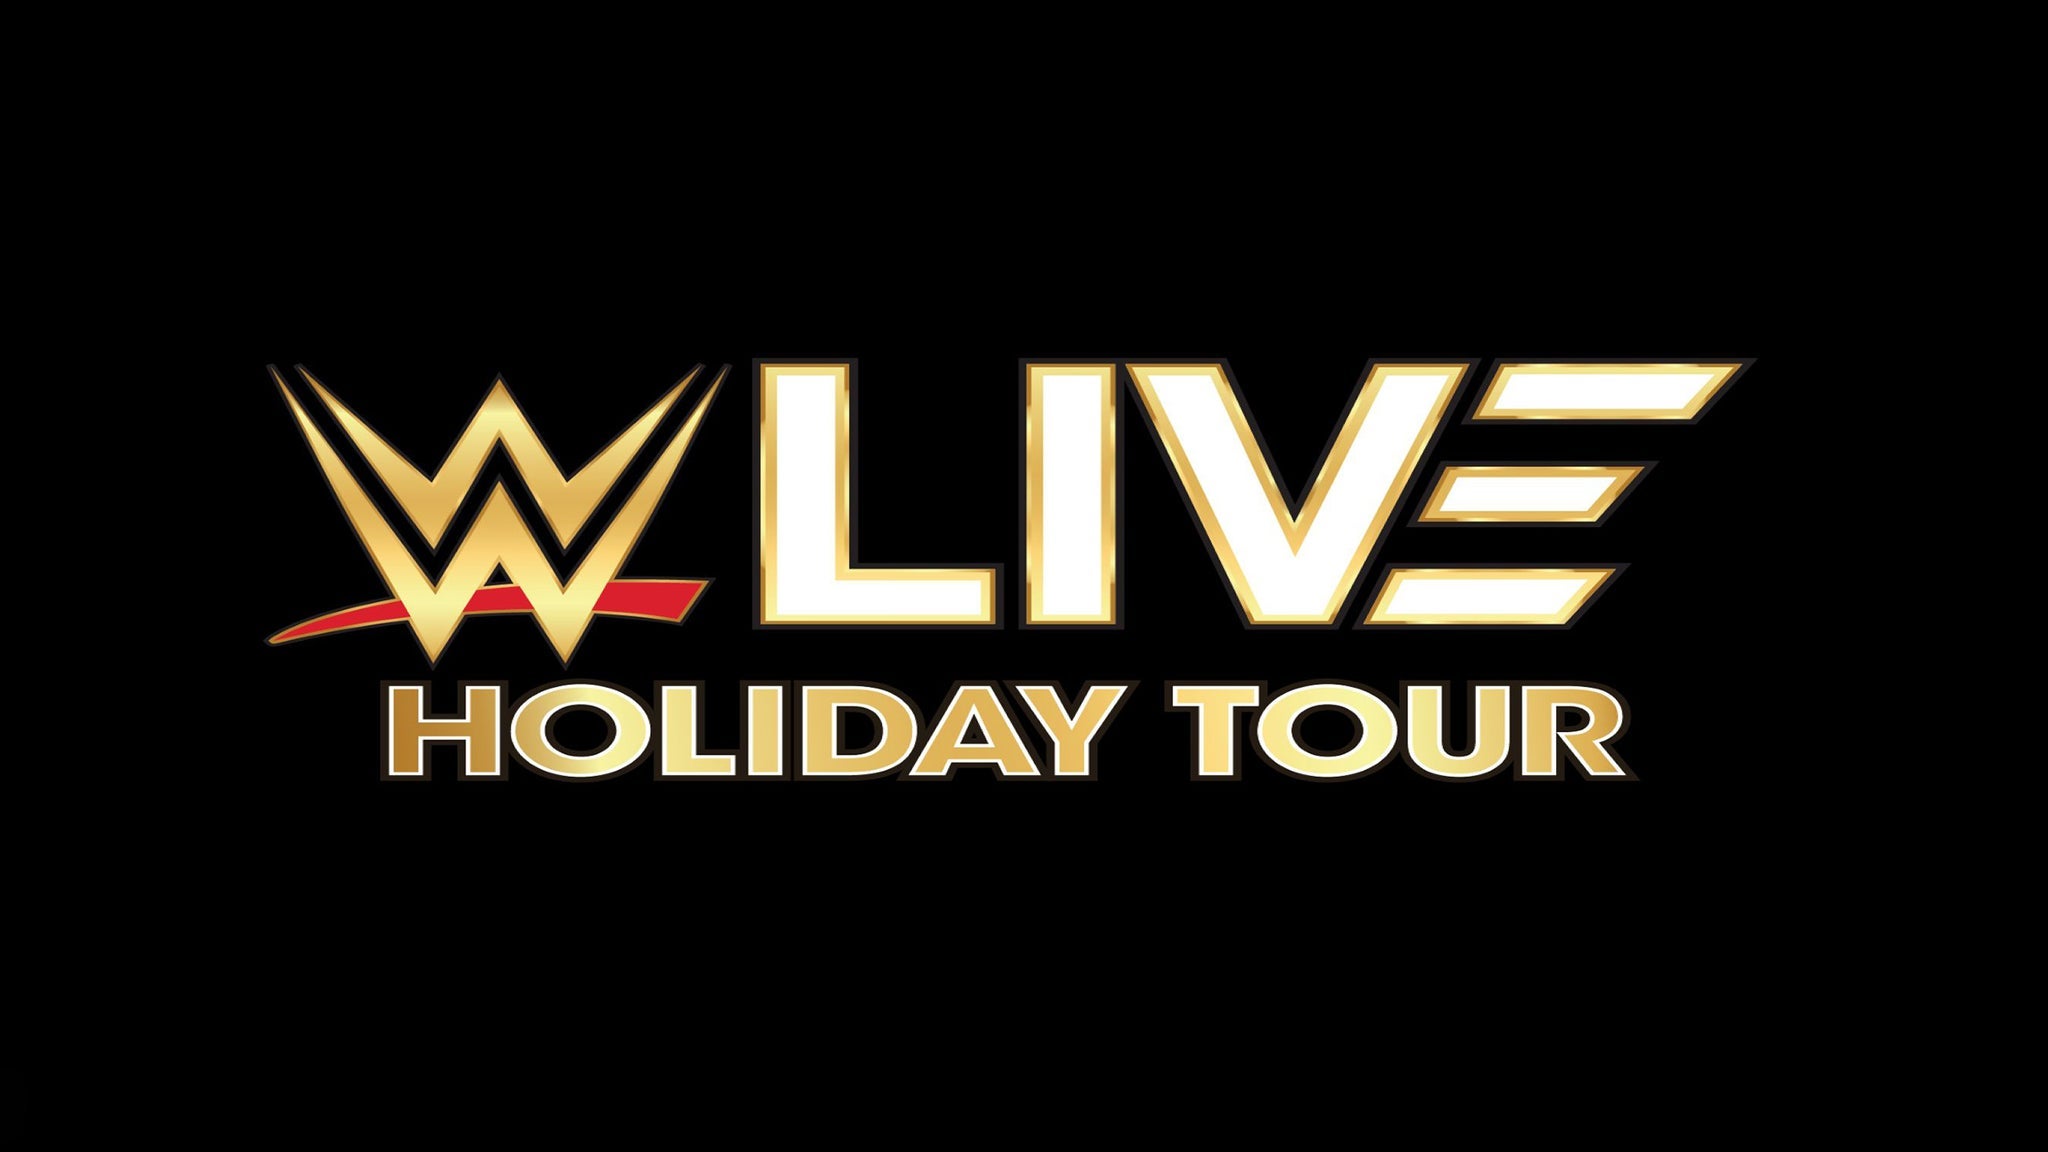 WWE Live Holiday Tour in University Park promo photo for BJC Insiders presale offer code